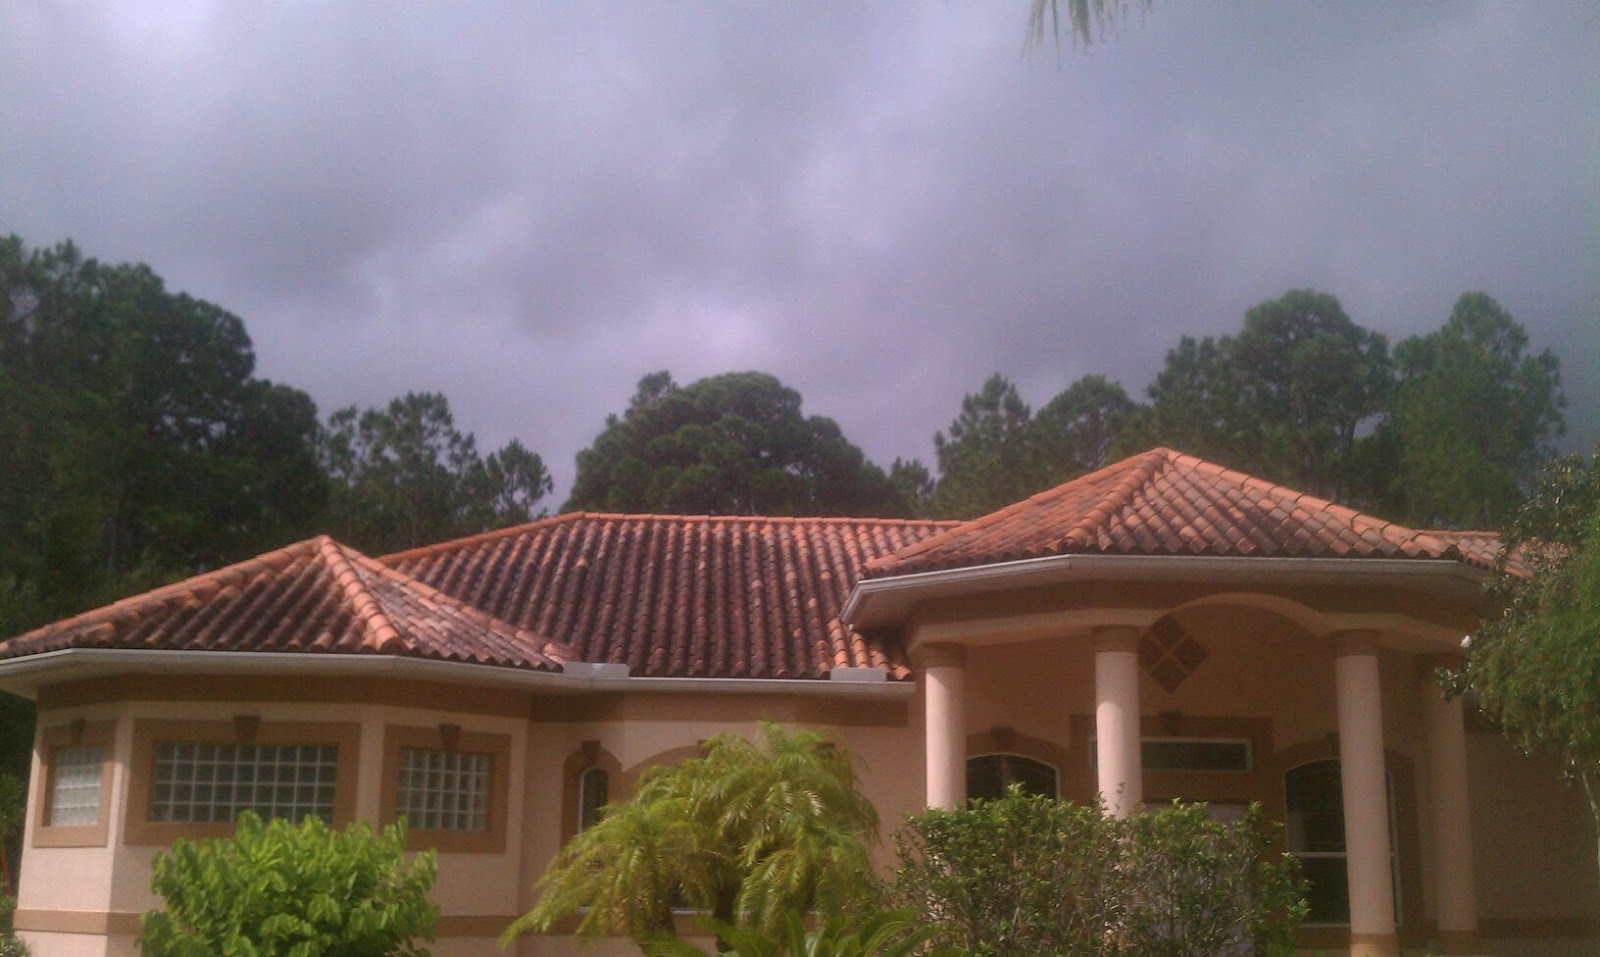 Port Charlotte Roof Cleaning Soft Wash Shingle Tile Metal Roof Cleaning A 1 Pressure Washing Roof Cleaning 941 815 8454 Www Sarasotacleaningsolutions Com